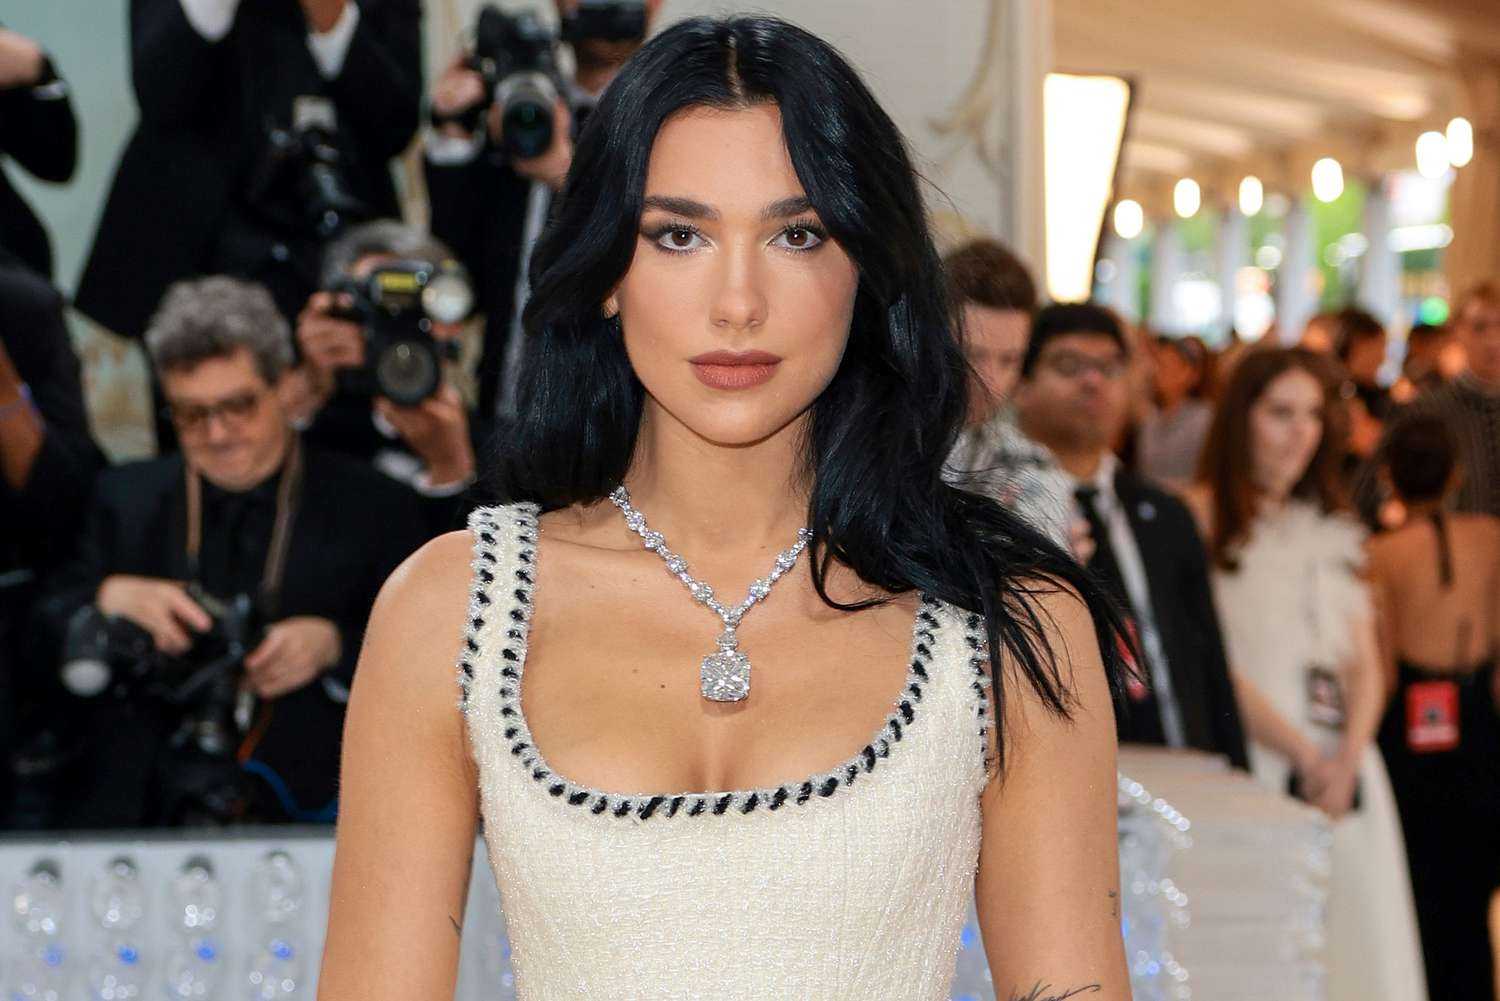 Dua Lipa talks about getting a nod from Katy Perry